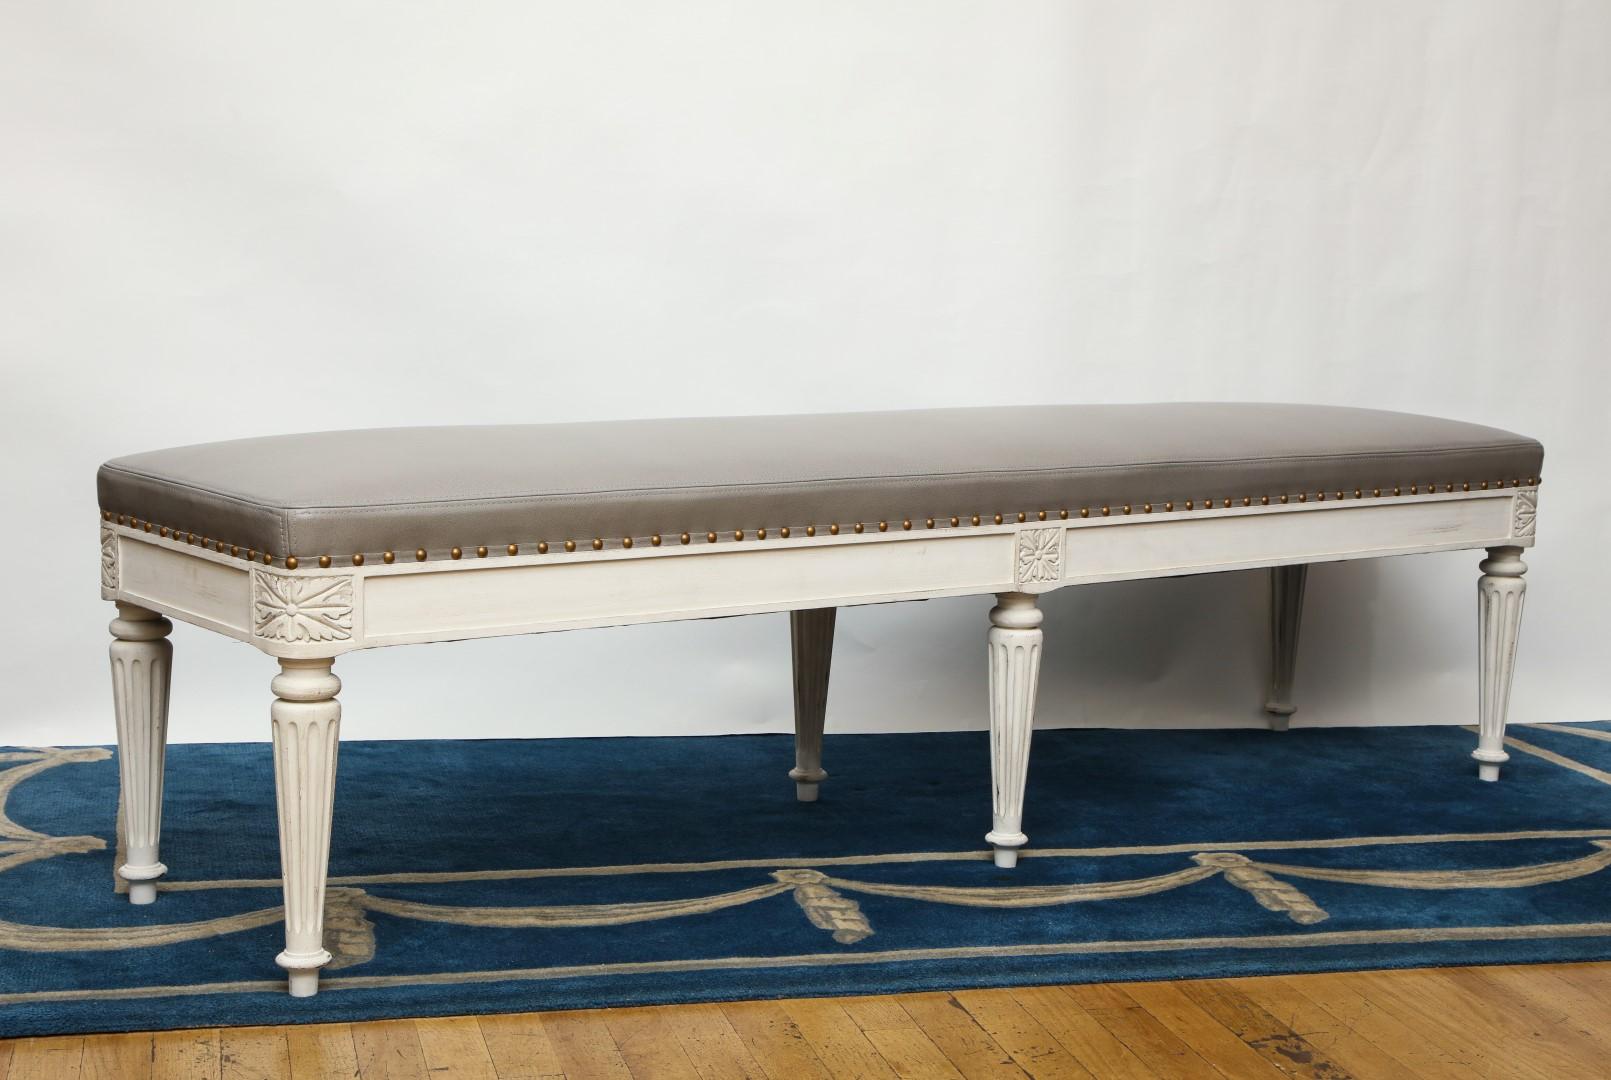 Montreuil Bench, Louis XVI Style Bench with Leather Upholstery, by David Duncan In New Condition For Sale In New York, NY